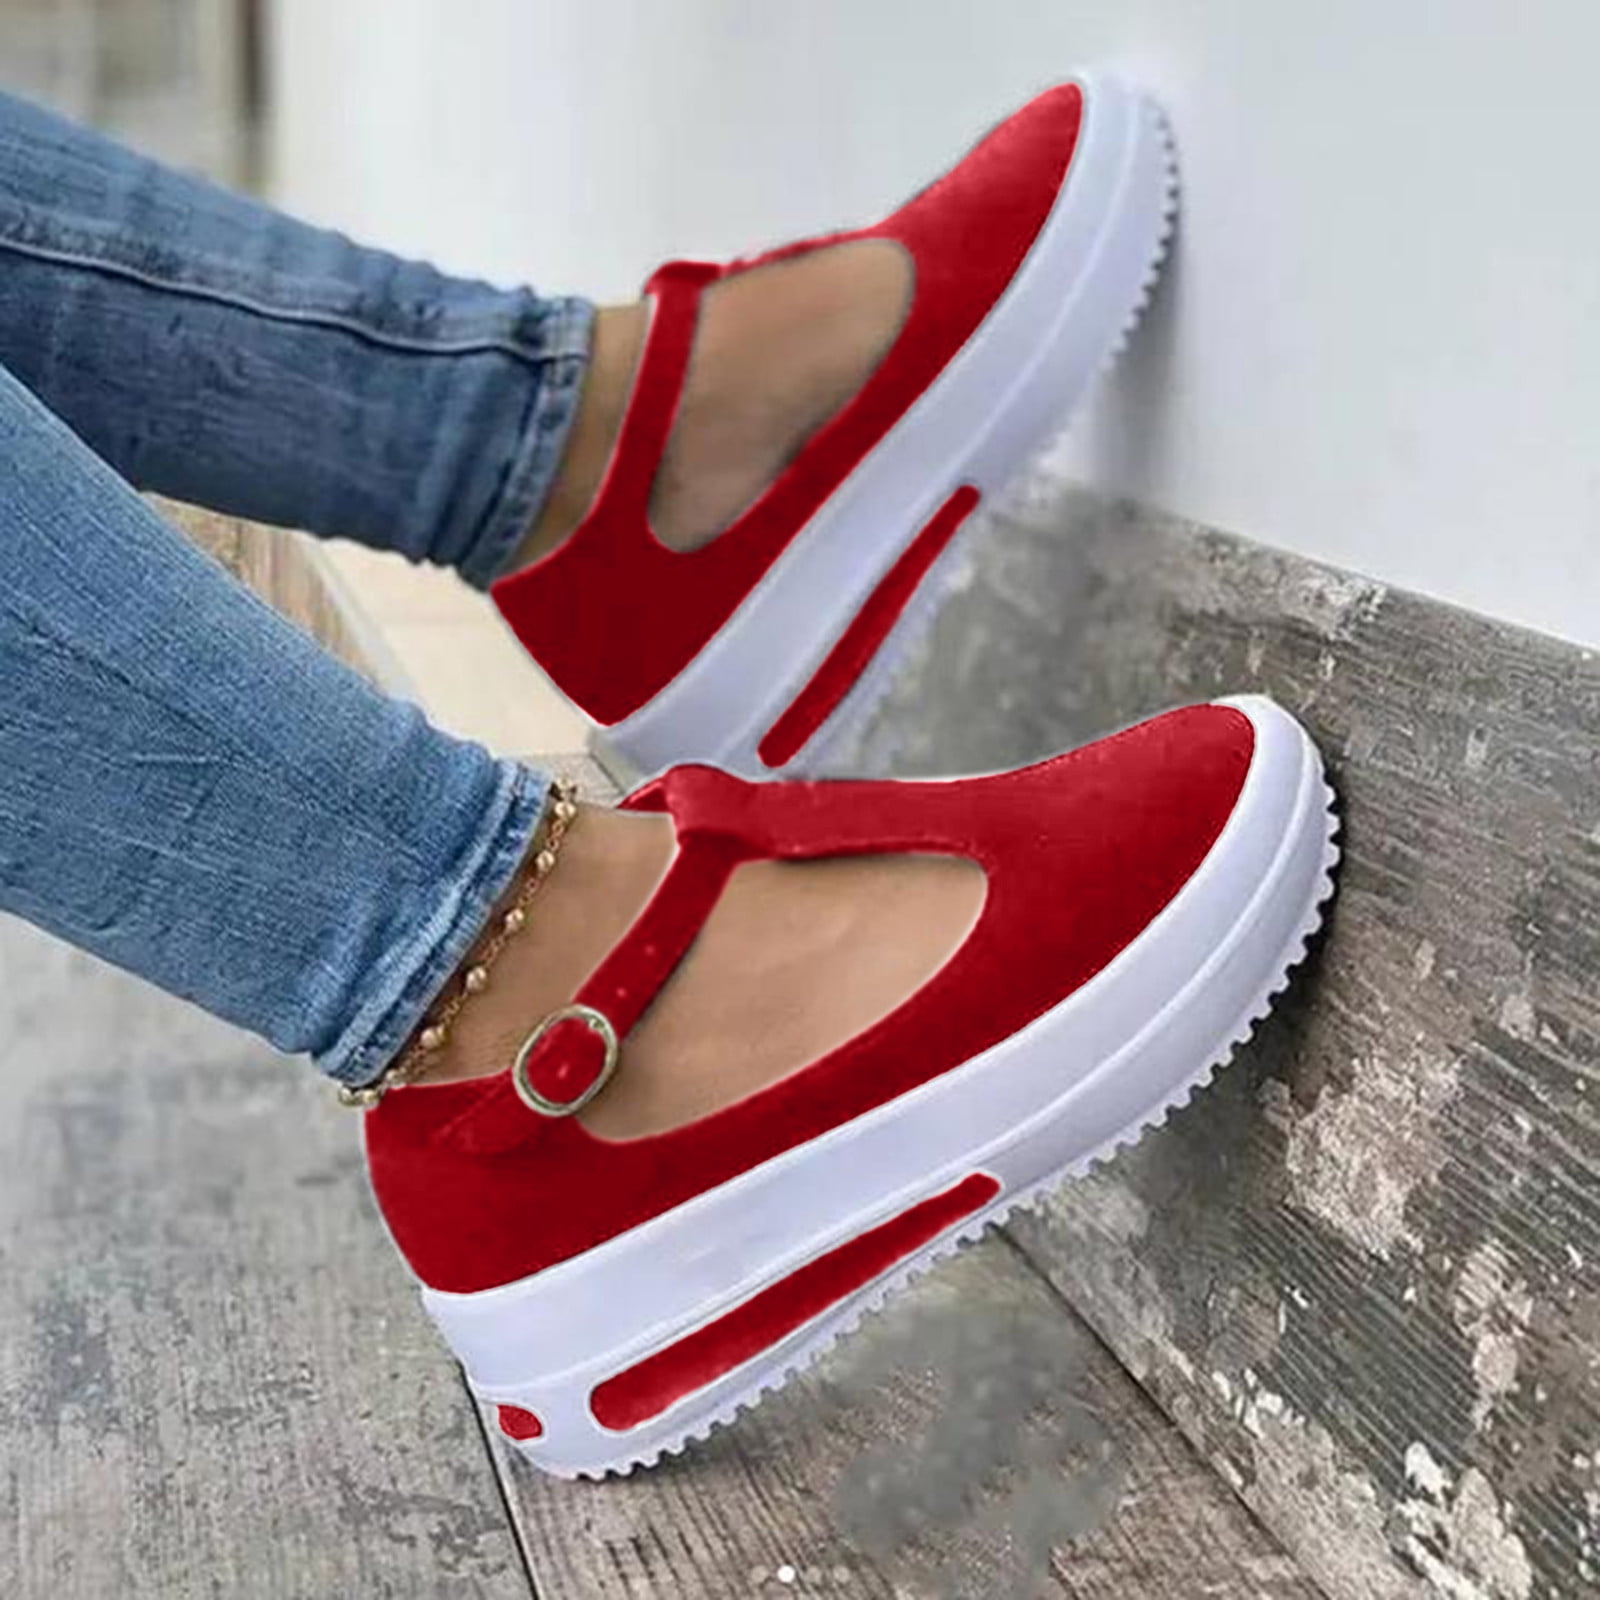 LoyisViDion Women Shoes Clearance Women'S Fashion Wedge Platform Buckle Strap Sandals Cusual Solid Shoes Special offers Red 10 - Walmart.com